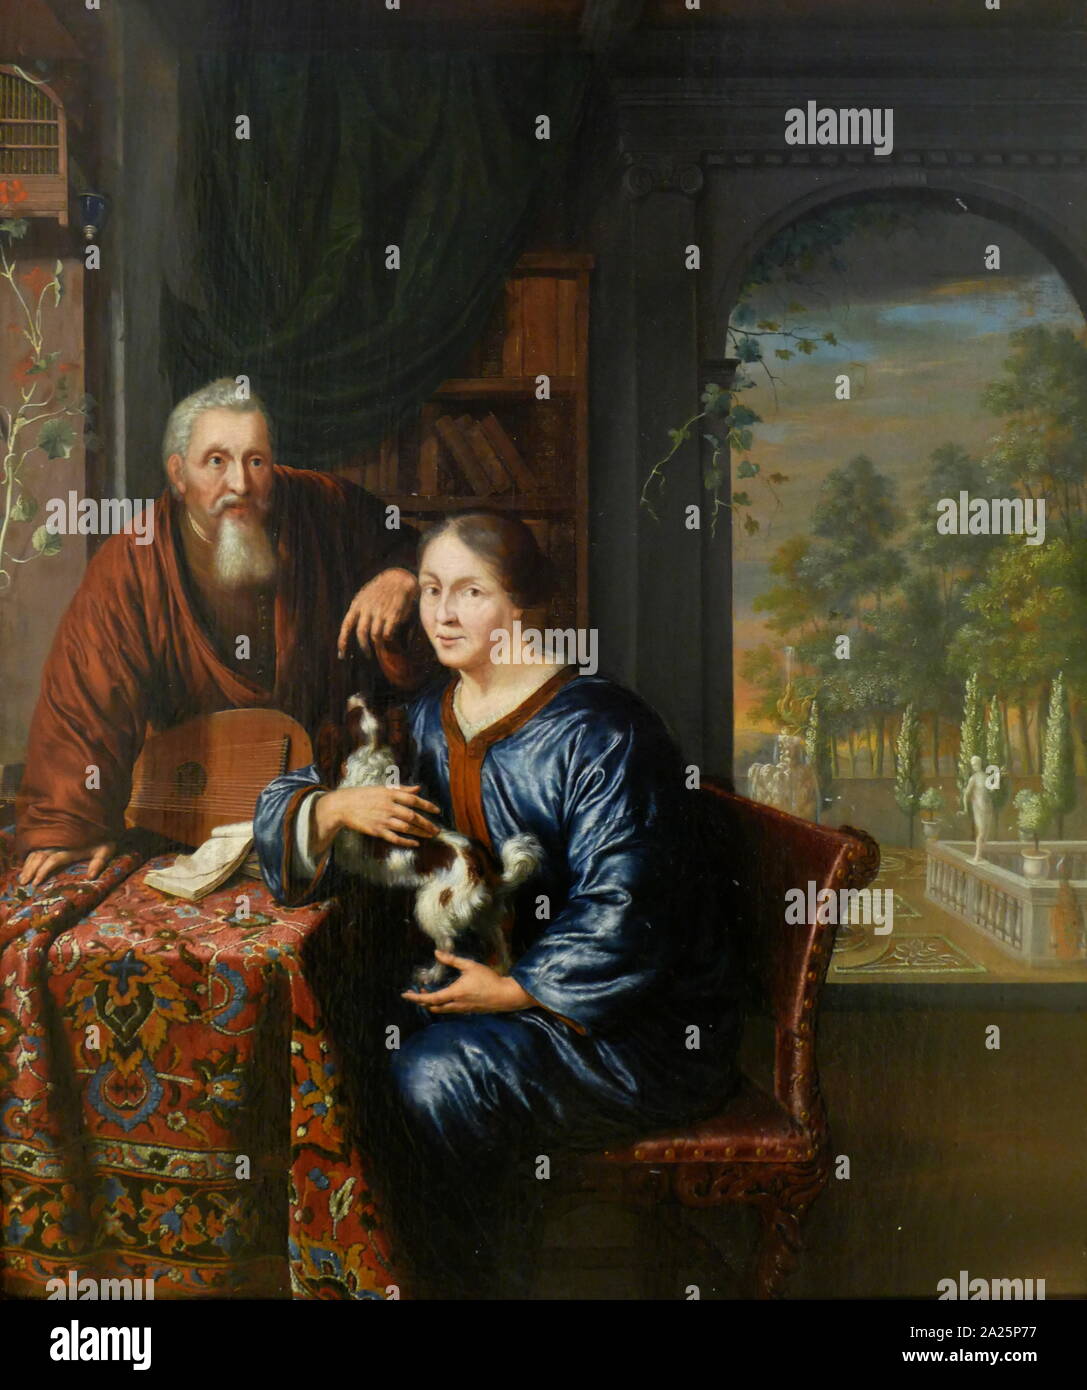 Painting titled 'a dutchman and his wife' by willem van mieris. willem van mieris (1662-1747) a dutch painter Stock Photo